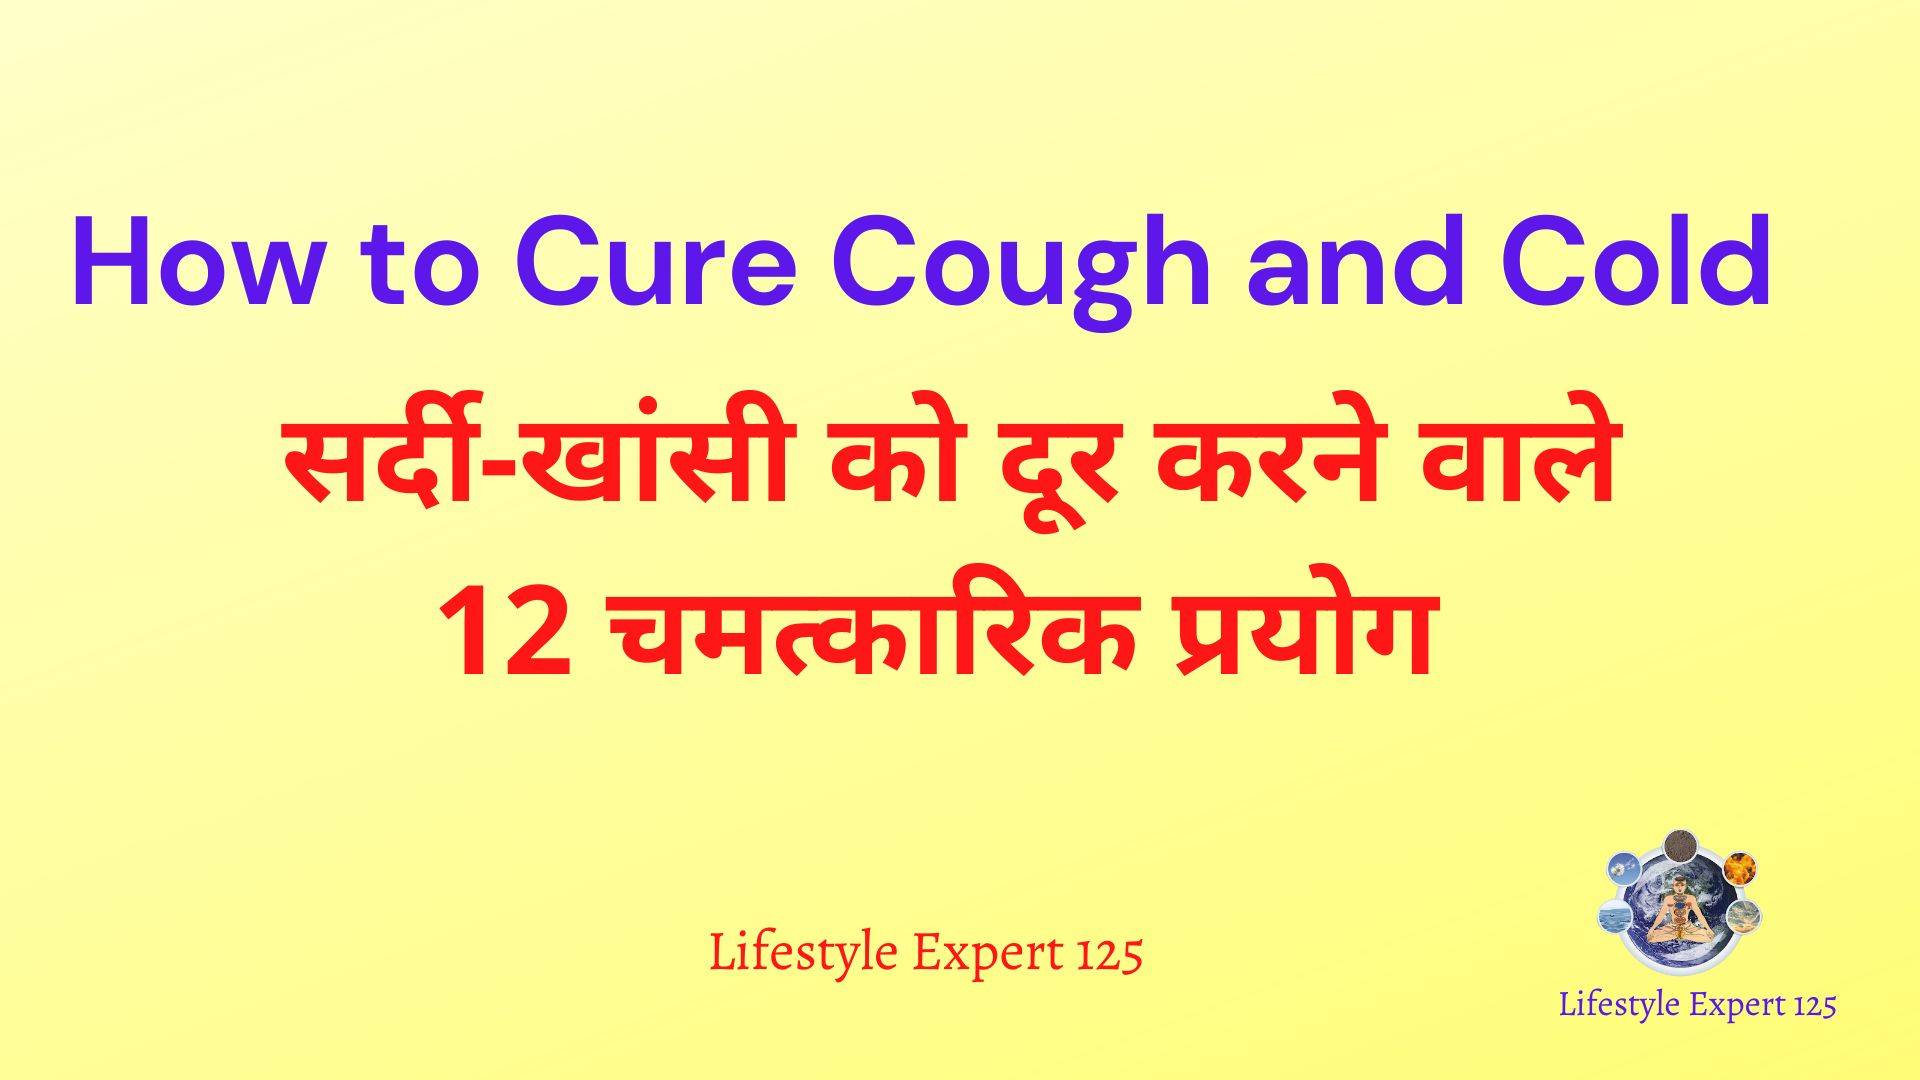 How to Cure Cough and Cold